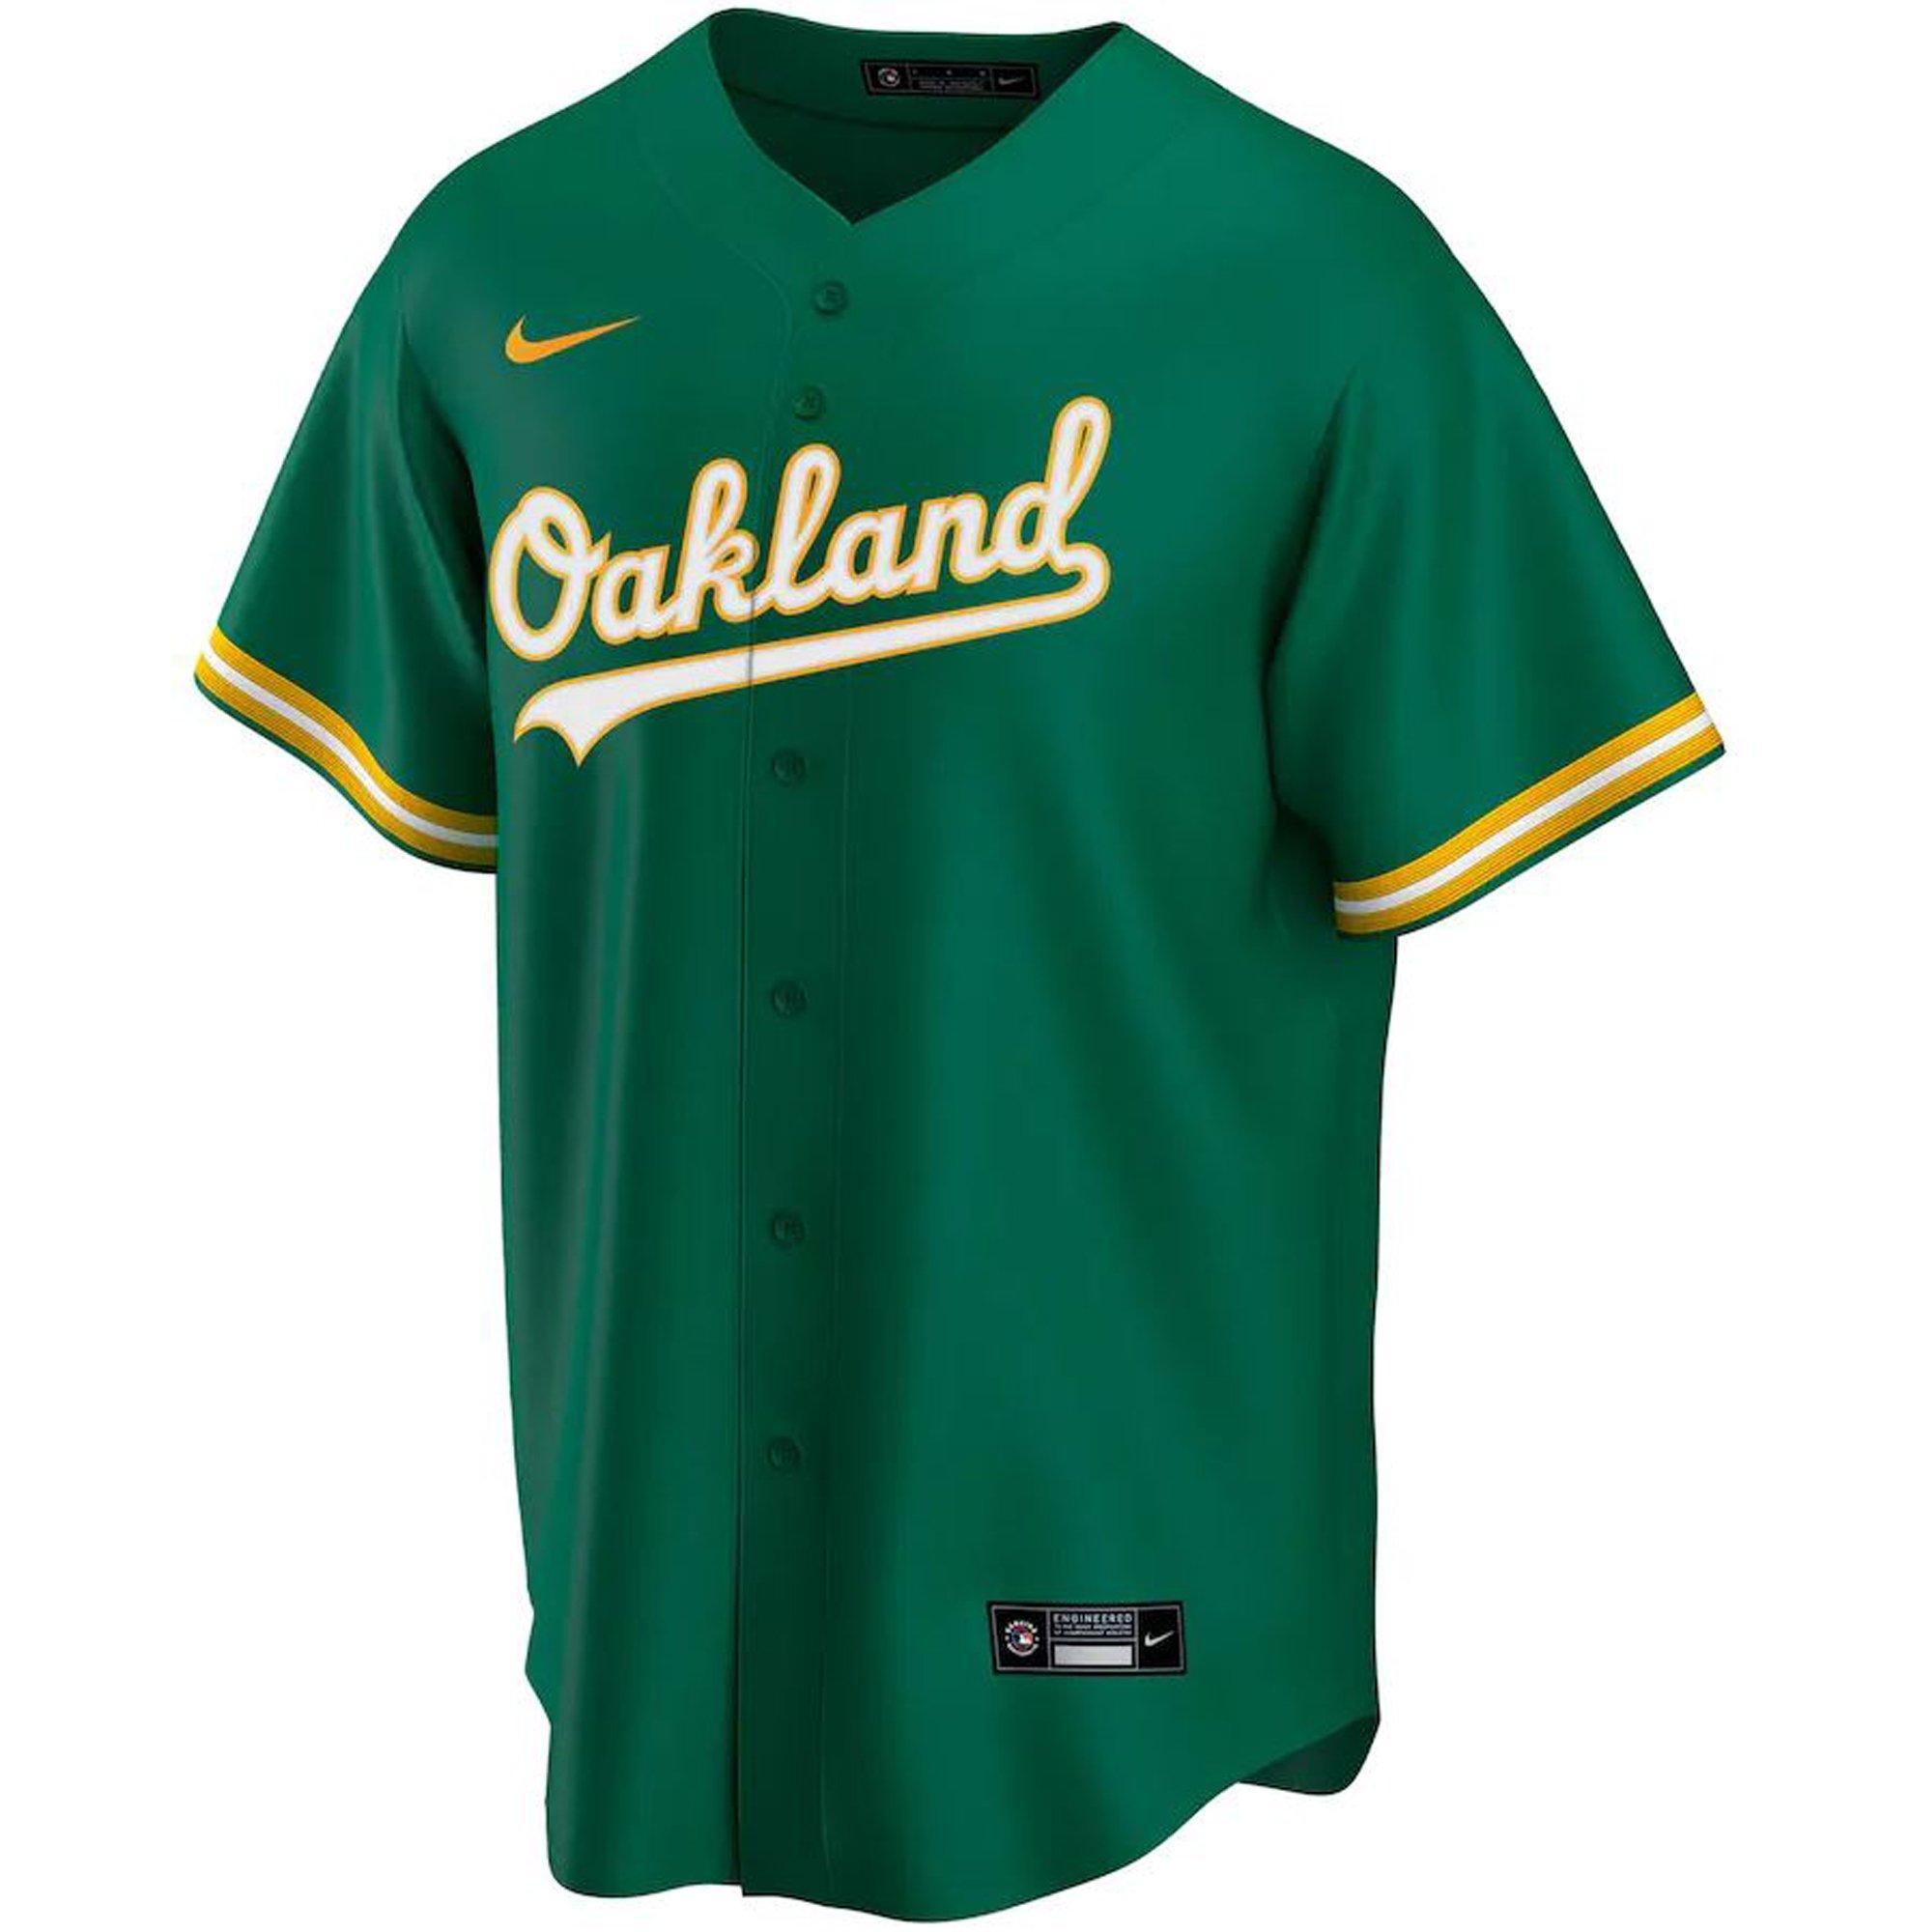 a's jersey,OFF 68%,www.concordehotels.com.tr